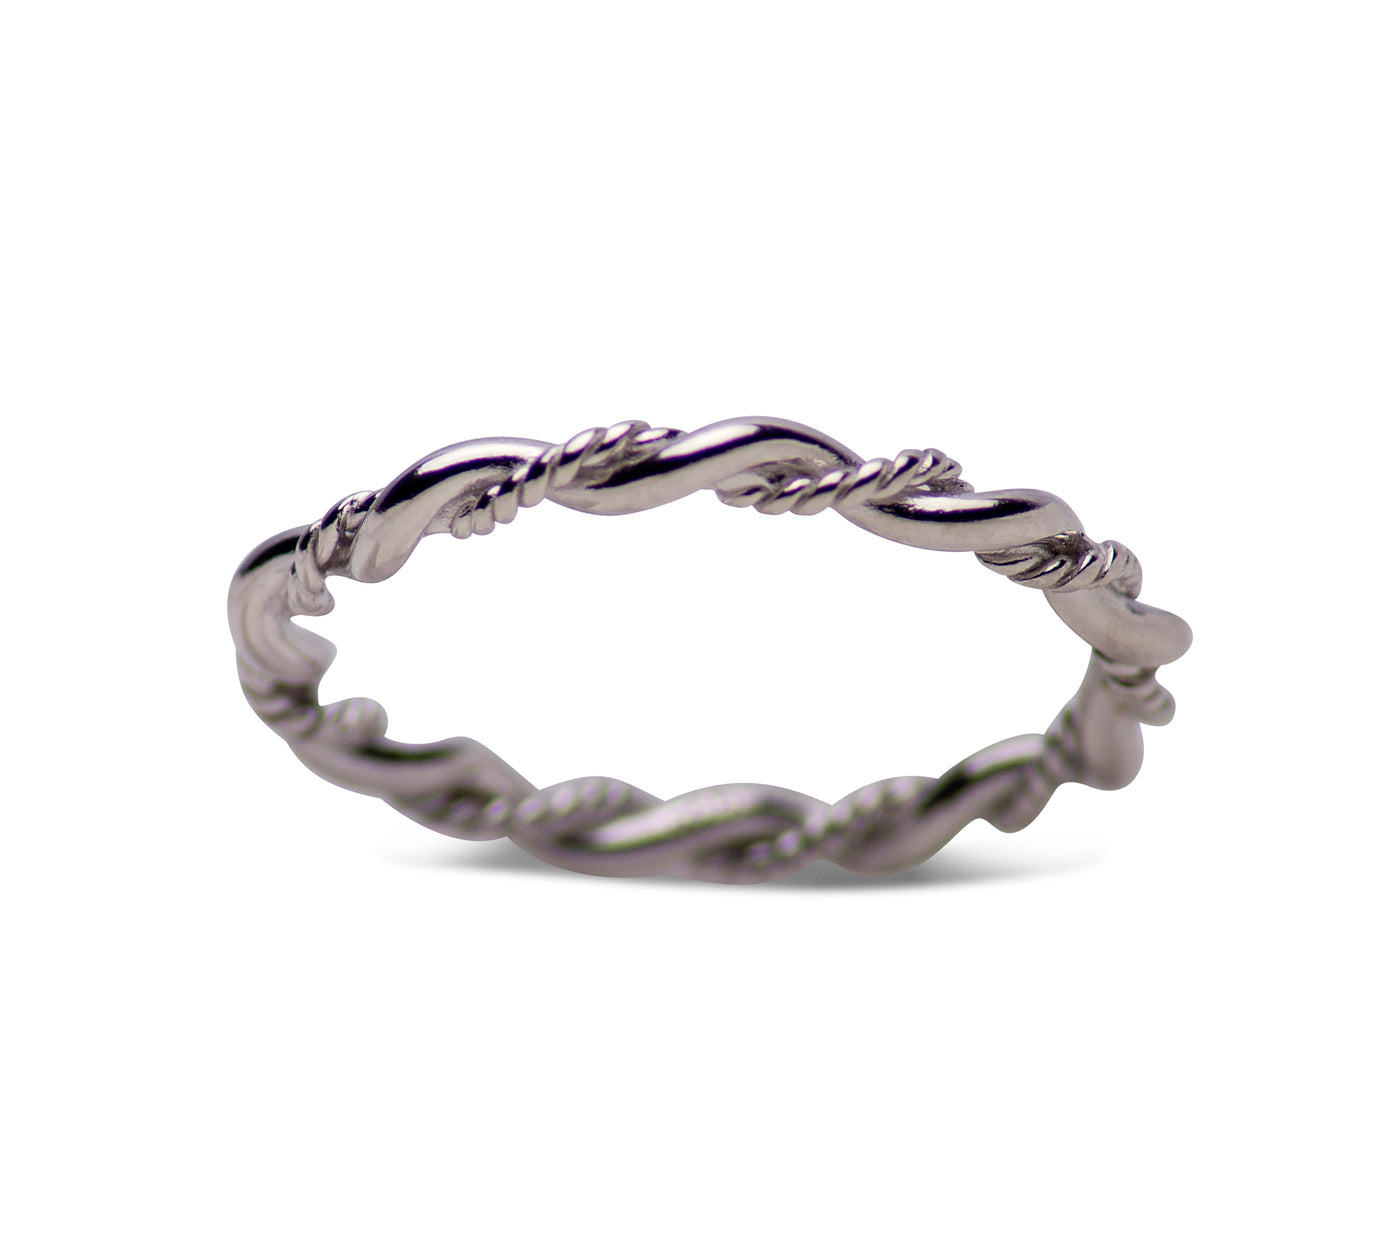 Twist Stackable Ring in Silver